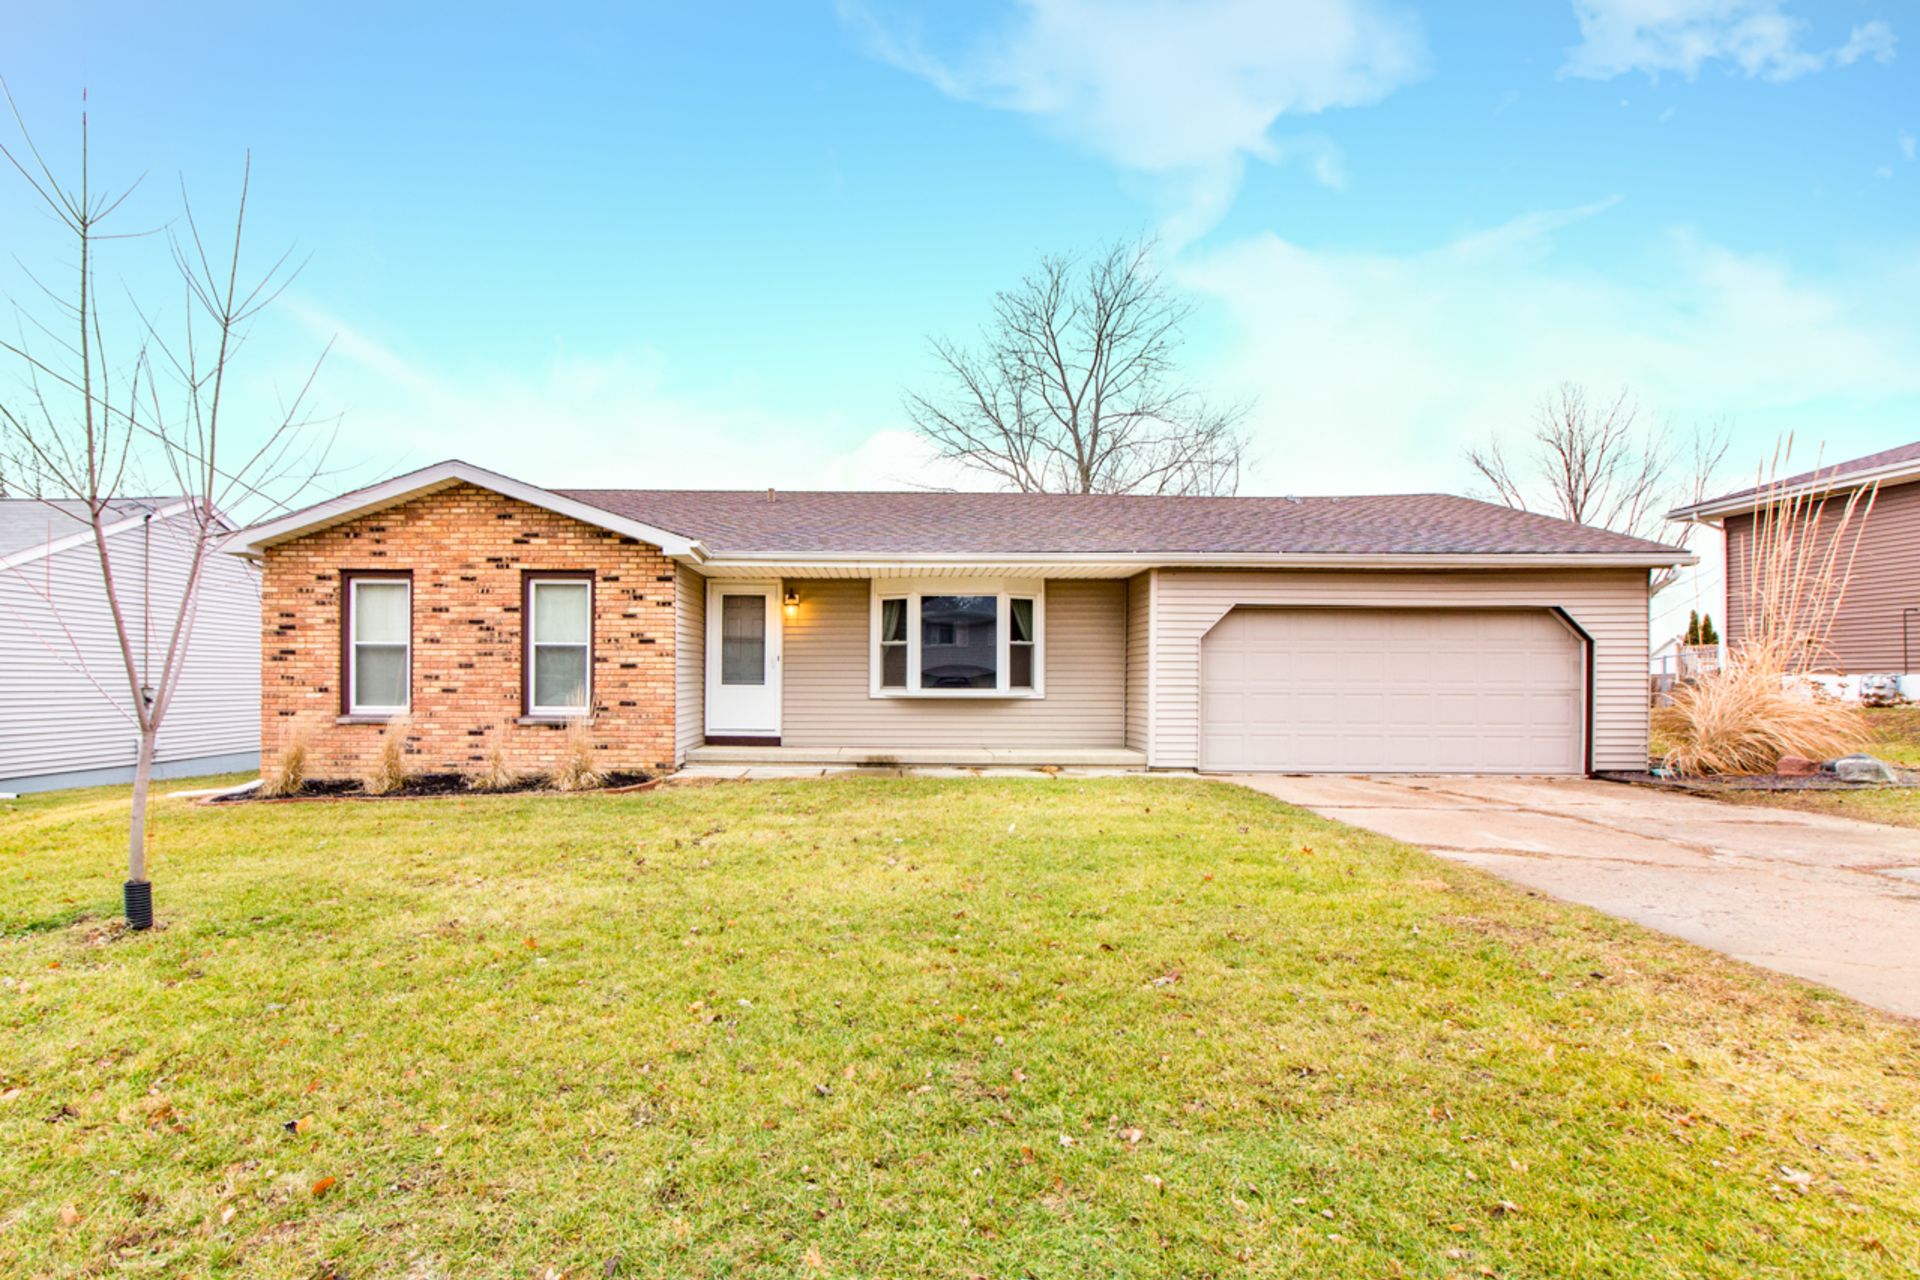 SOLD &#8211; 98.9% of List Price &#8211; 631 Kerfoot St., East Peoria